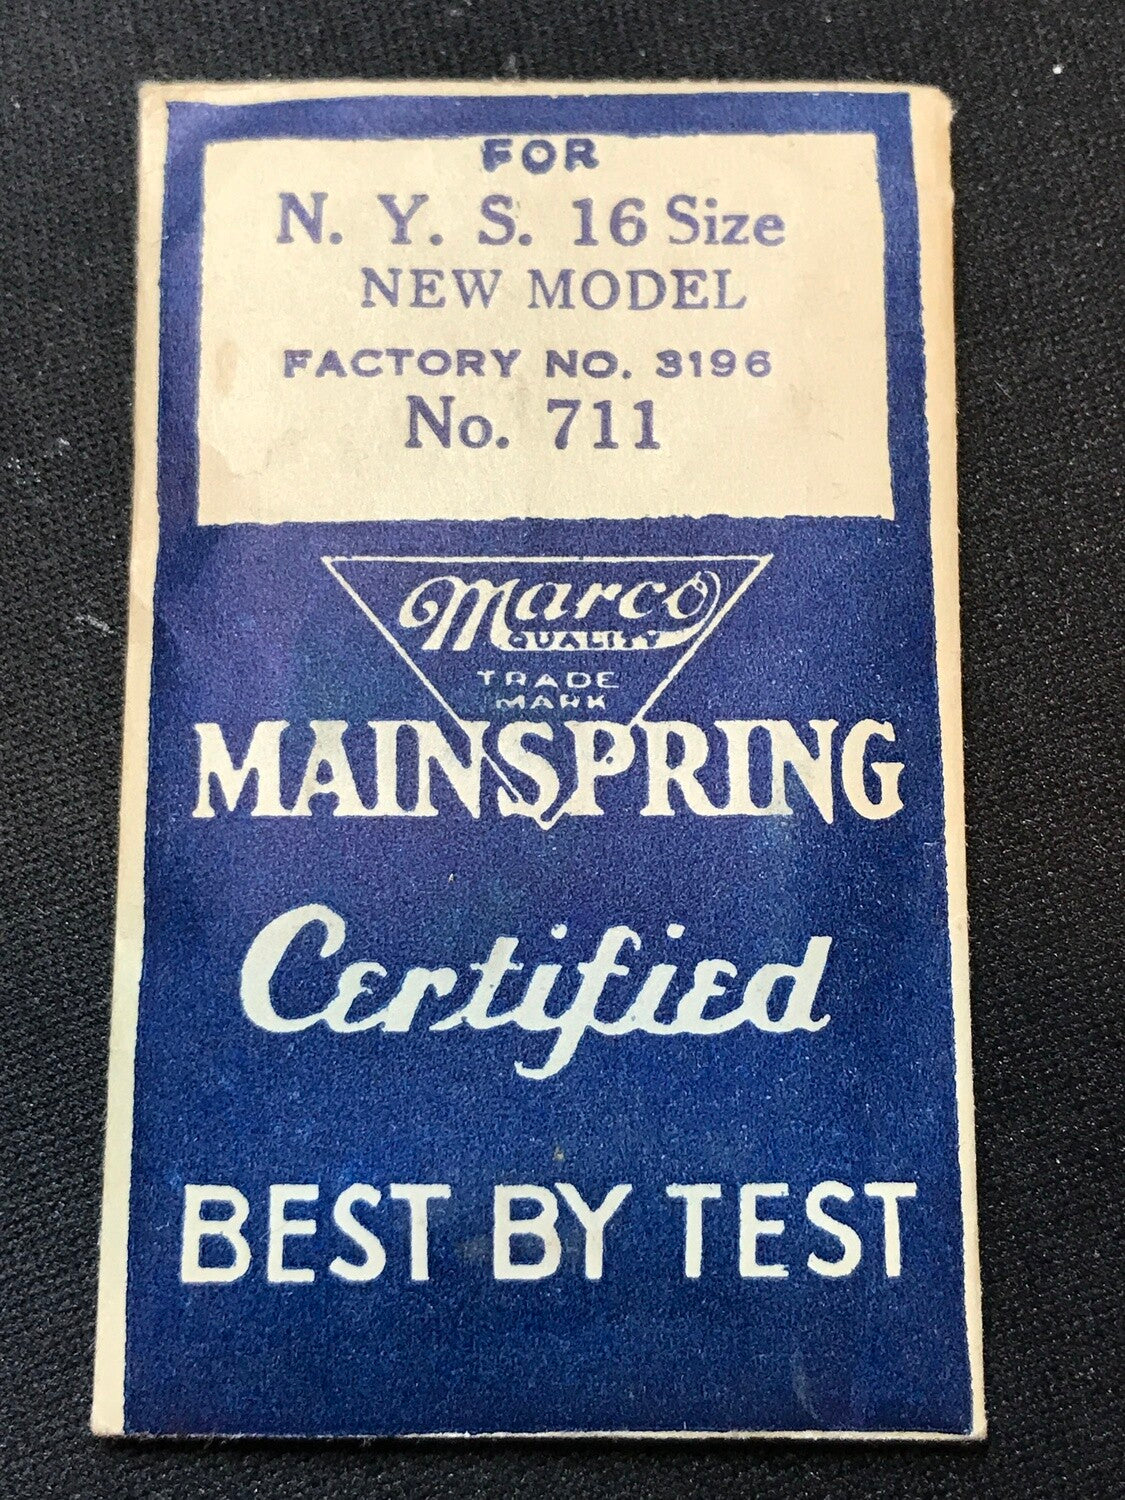 Marco Mainspring #711 for 16s N.Y. Standard Factory No. 3196 - Steel